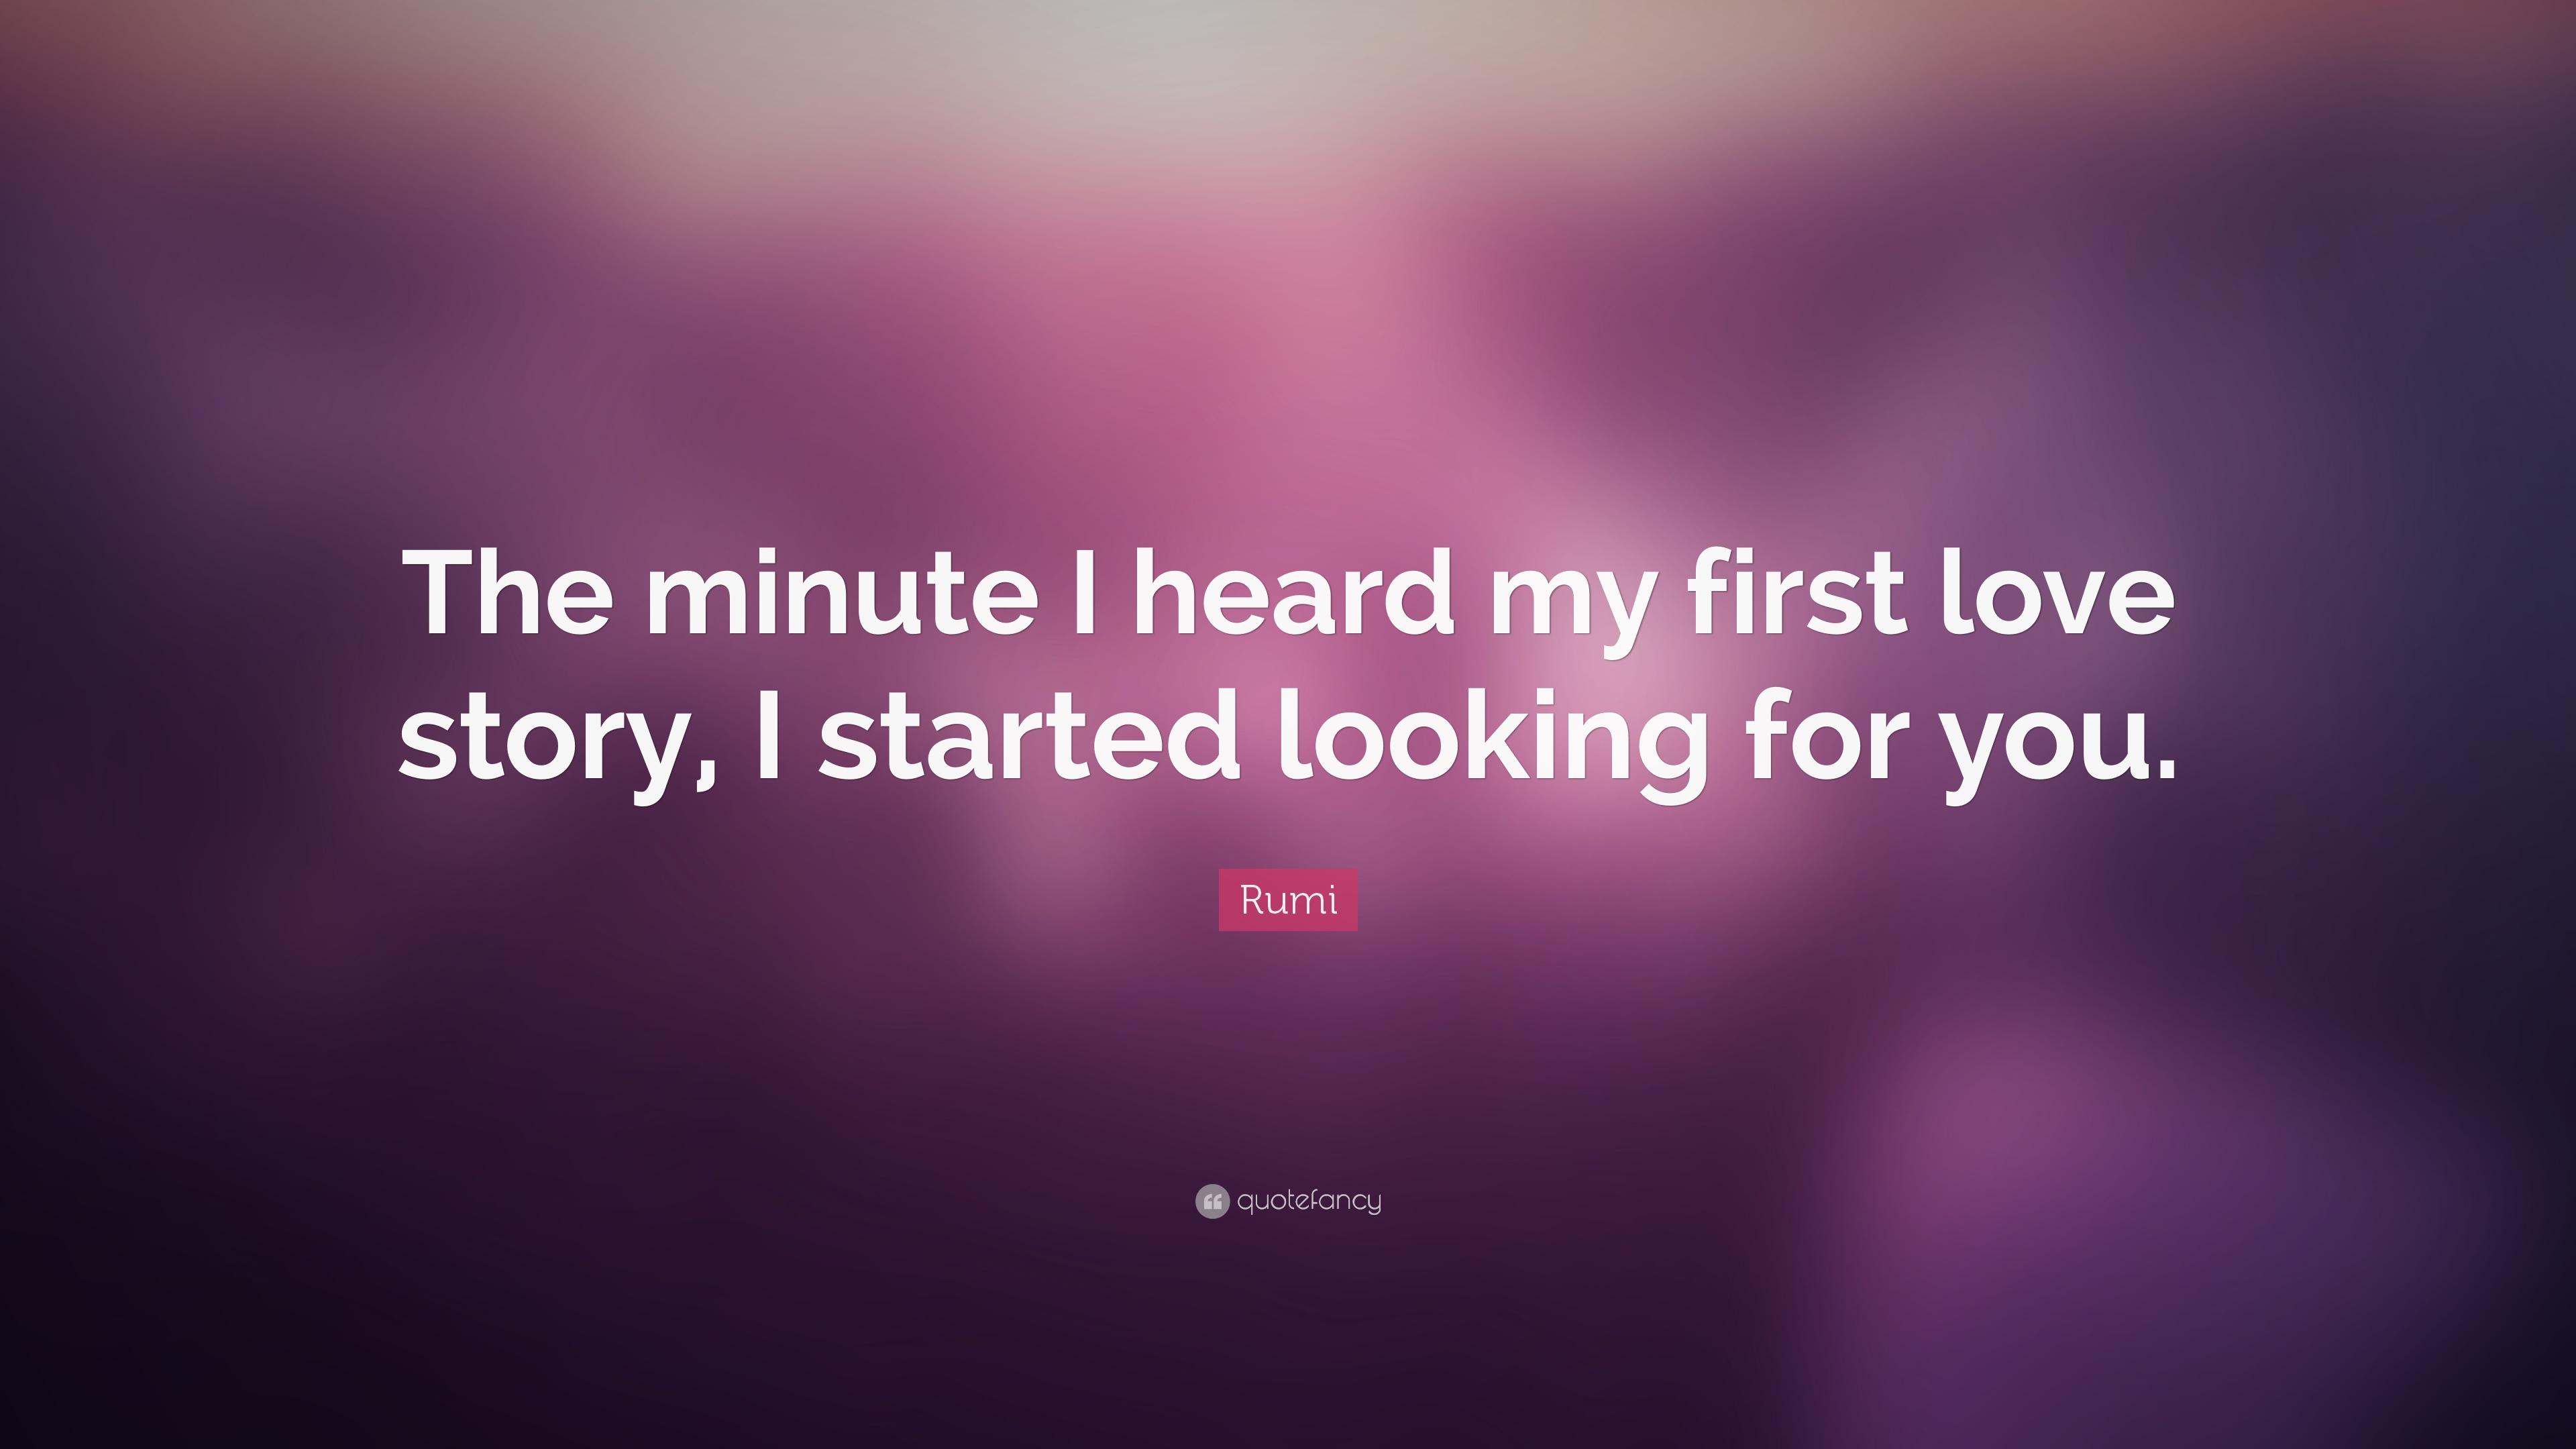 Rumi Quote: “The minute I heard my first love story, I